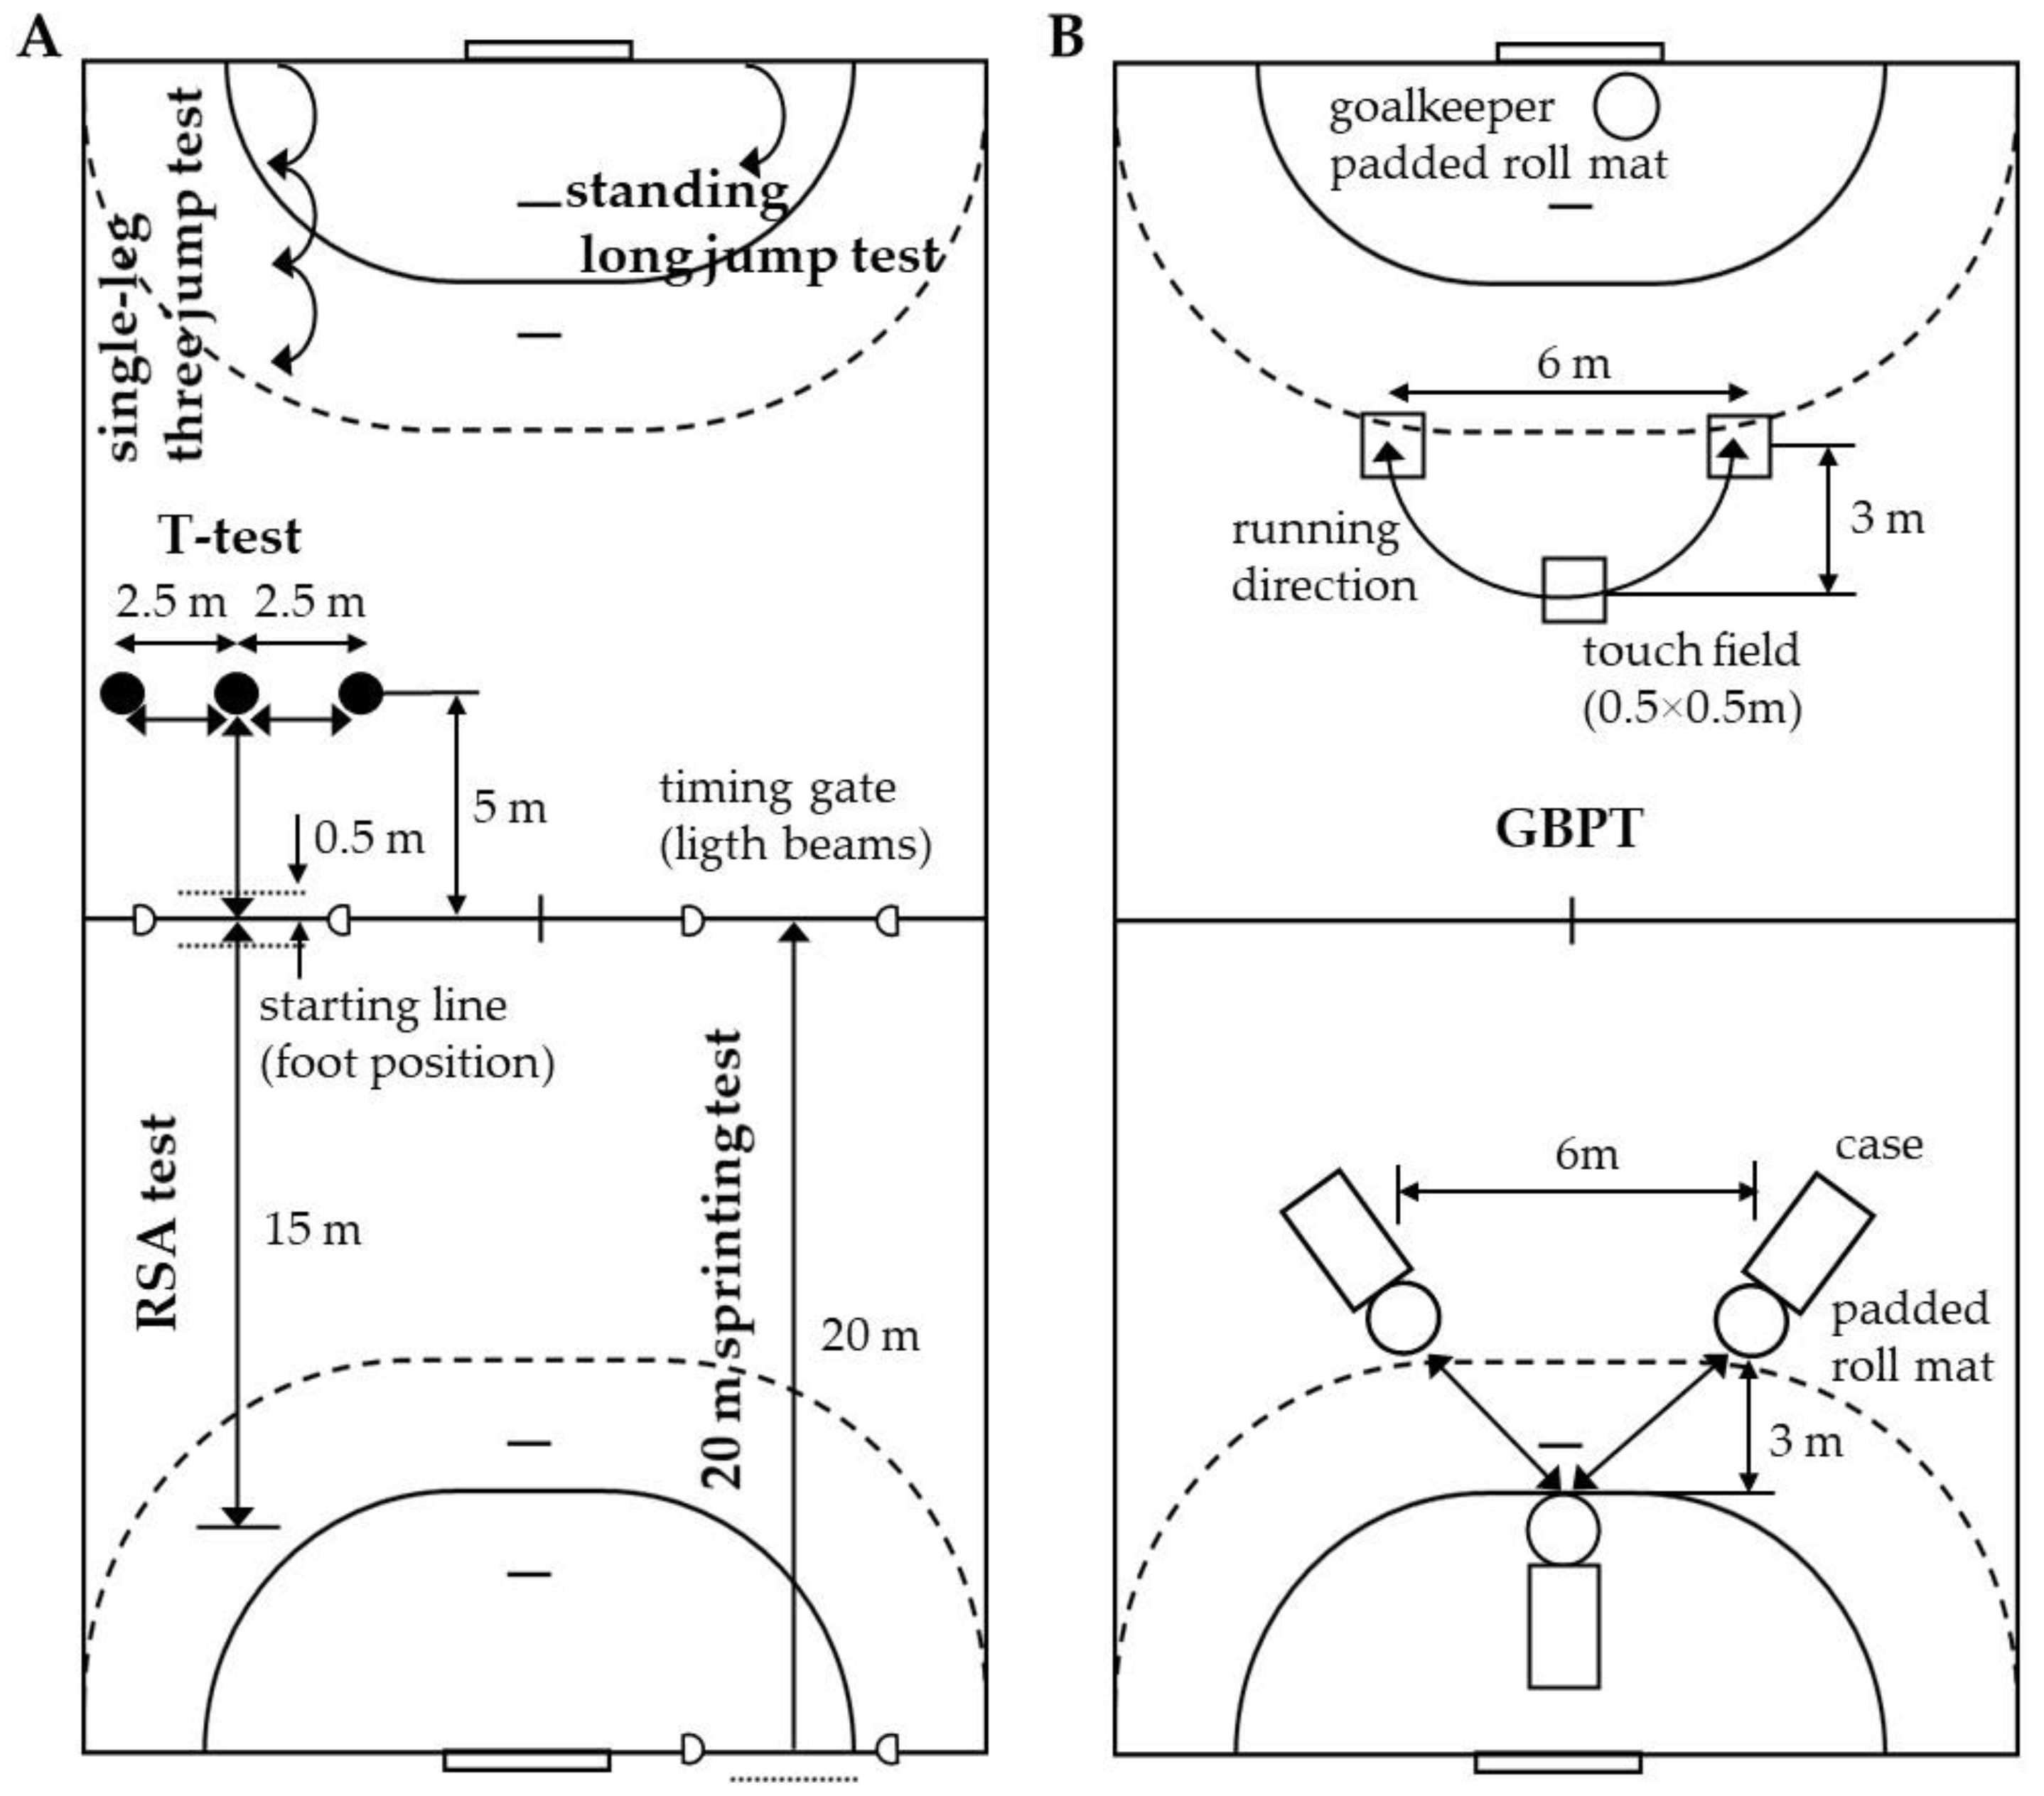 Applied Sciences Free Full-Text The Relationship between Specific Game-Based and General Performance in Young Adult Elite Male Team Handball Players pic